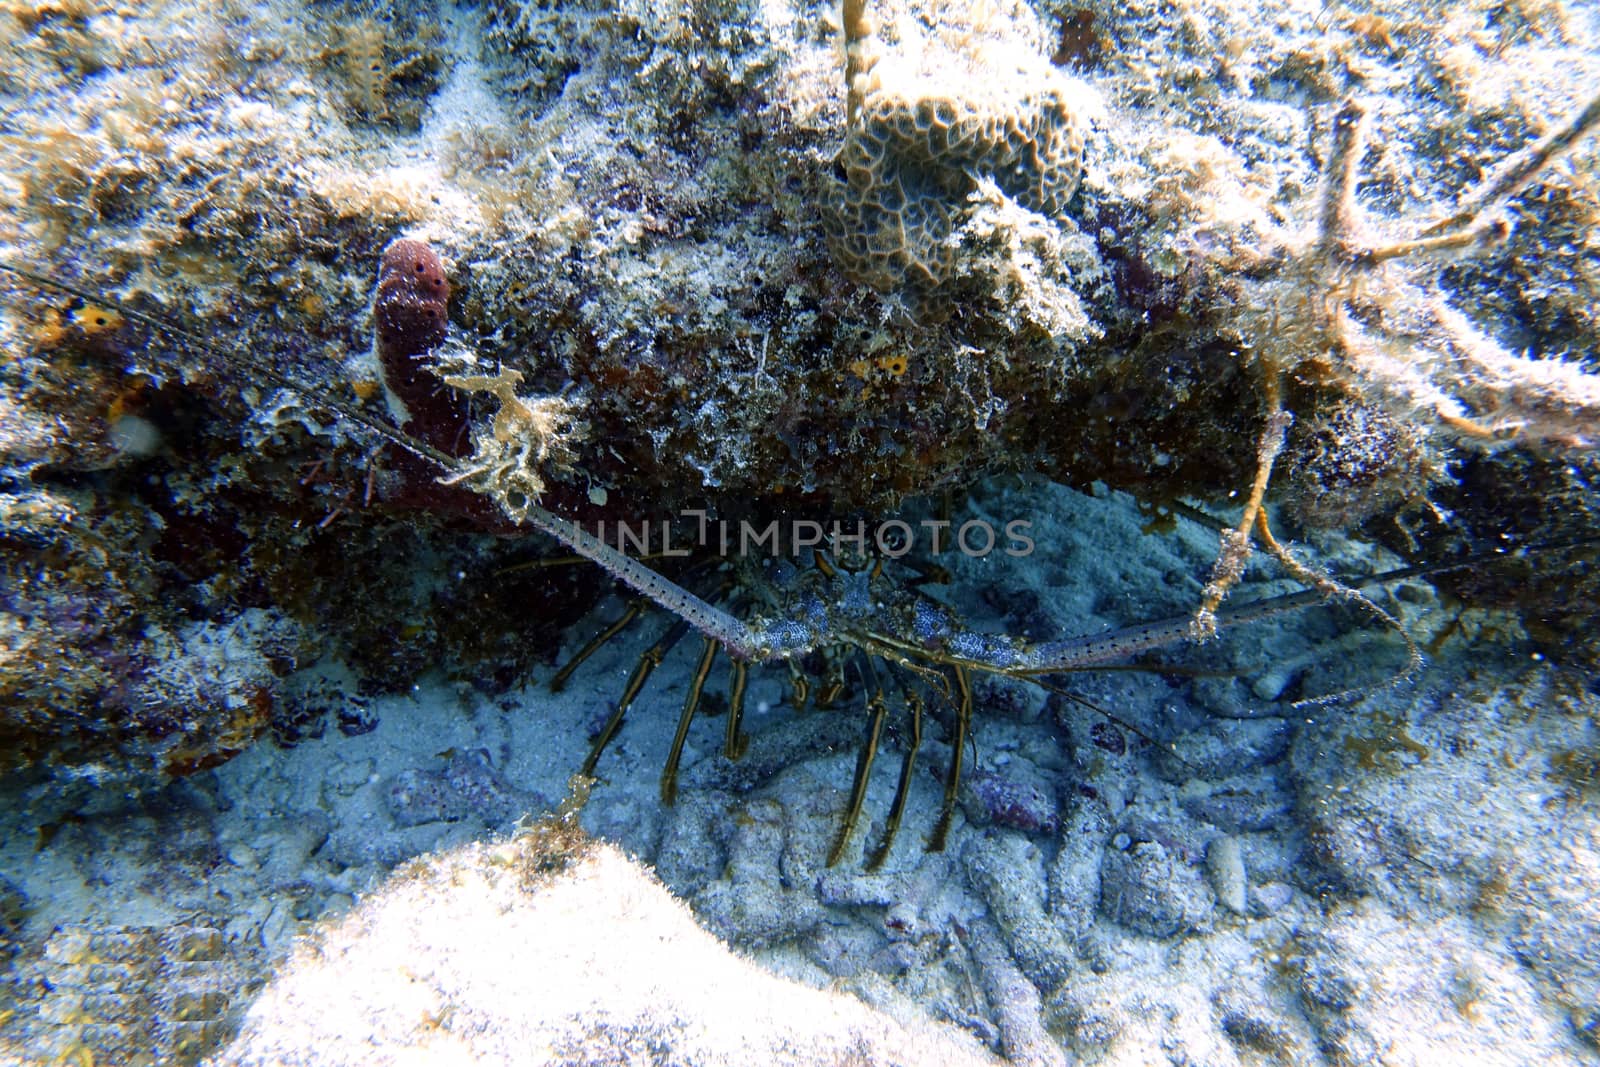 An underwater photo of a Lobster by Jshanebutt